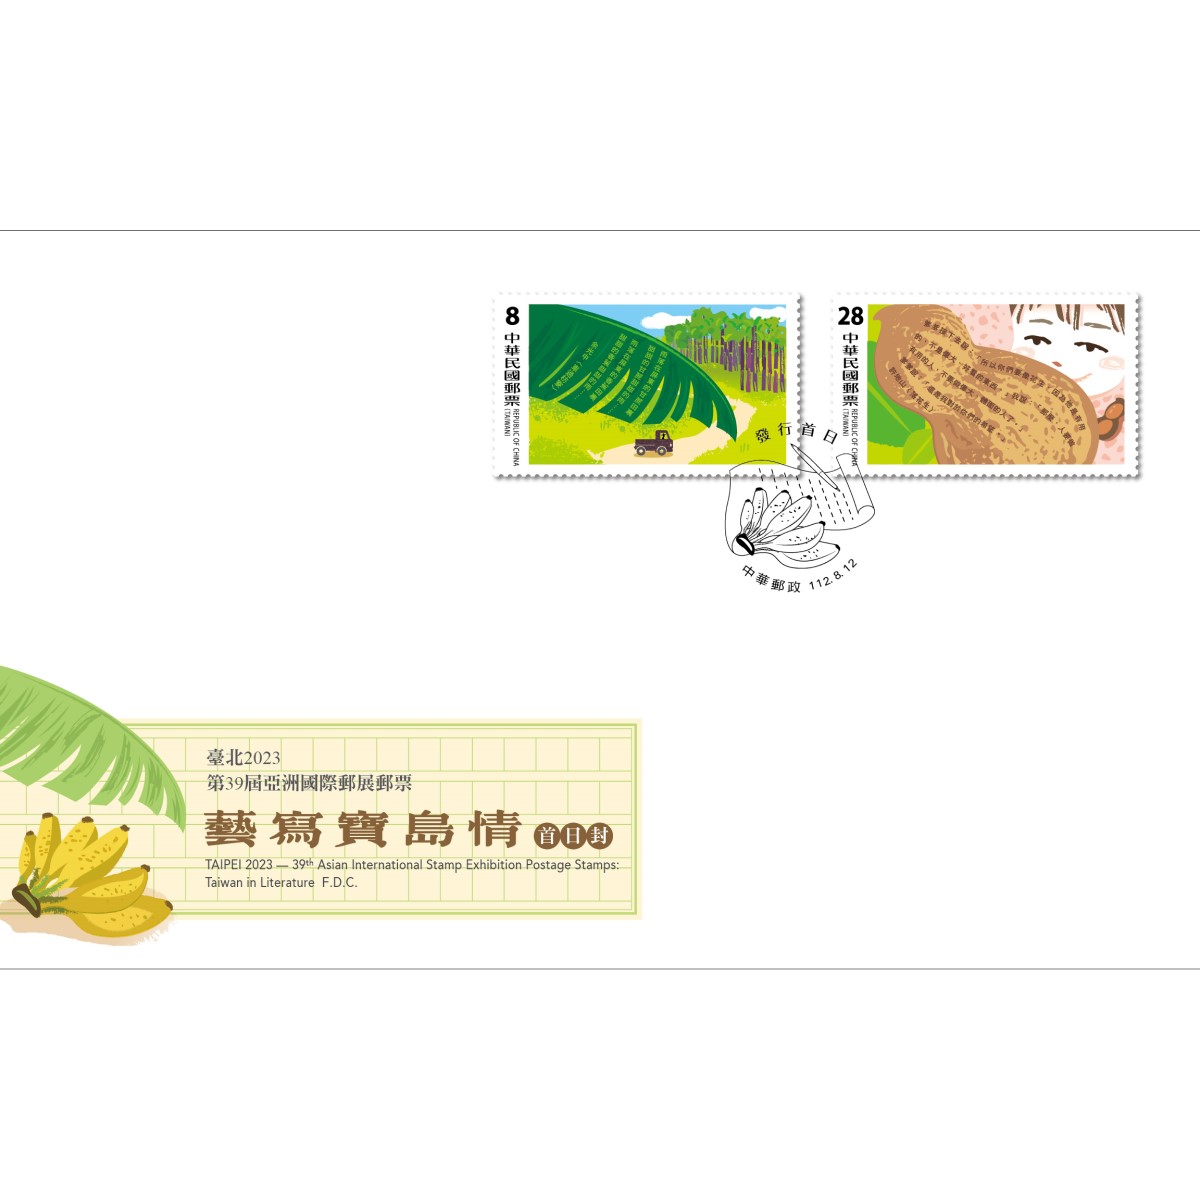 TAIPEI 2023 – 39th Asian International Stamp Exhibition Postage Stamps: Taiwan in Literature Pre-cancelled FDC affixed with a complete set of stamps